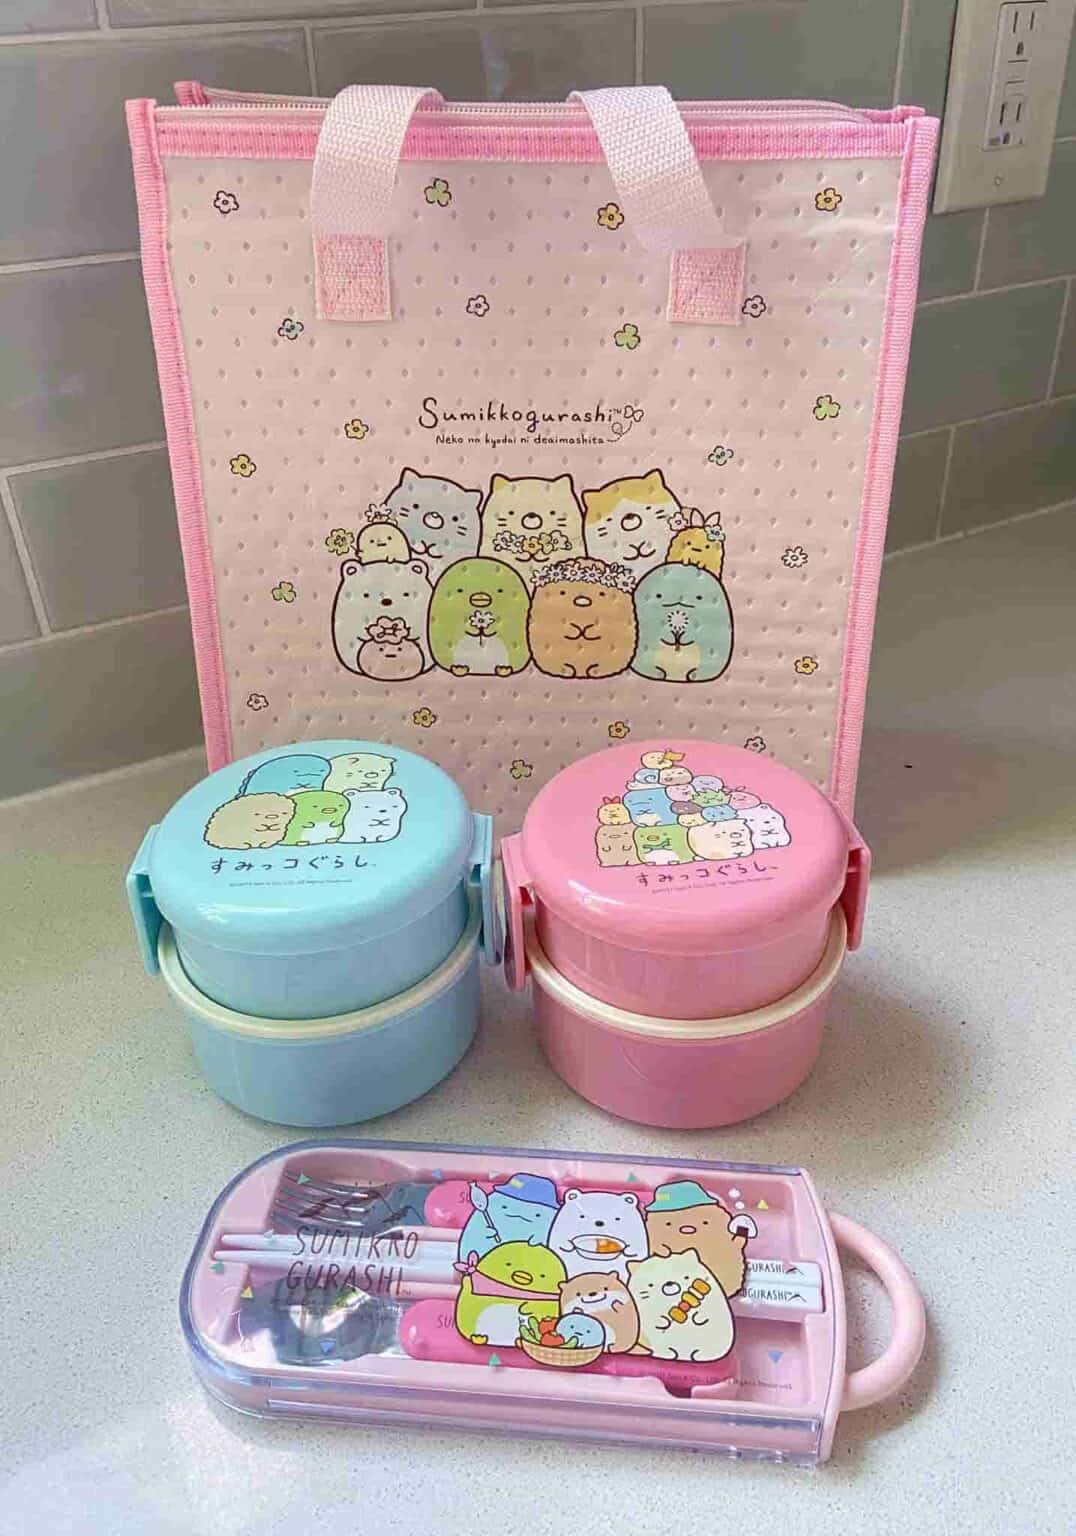 https://cdn.shopify.com/s/files/1/0528/2060/7157/products/clever-idiots-bento-sumikko-gurashi-round-bento-lunch-box-with-fork-38190559428822.jpg?v=1662659118&width=1076